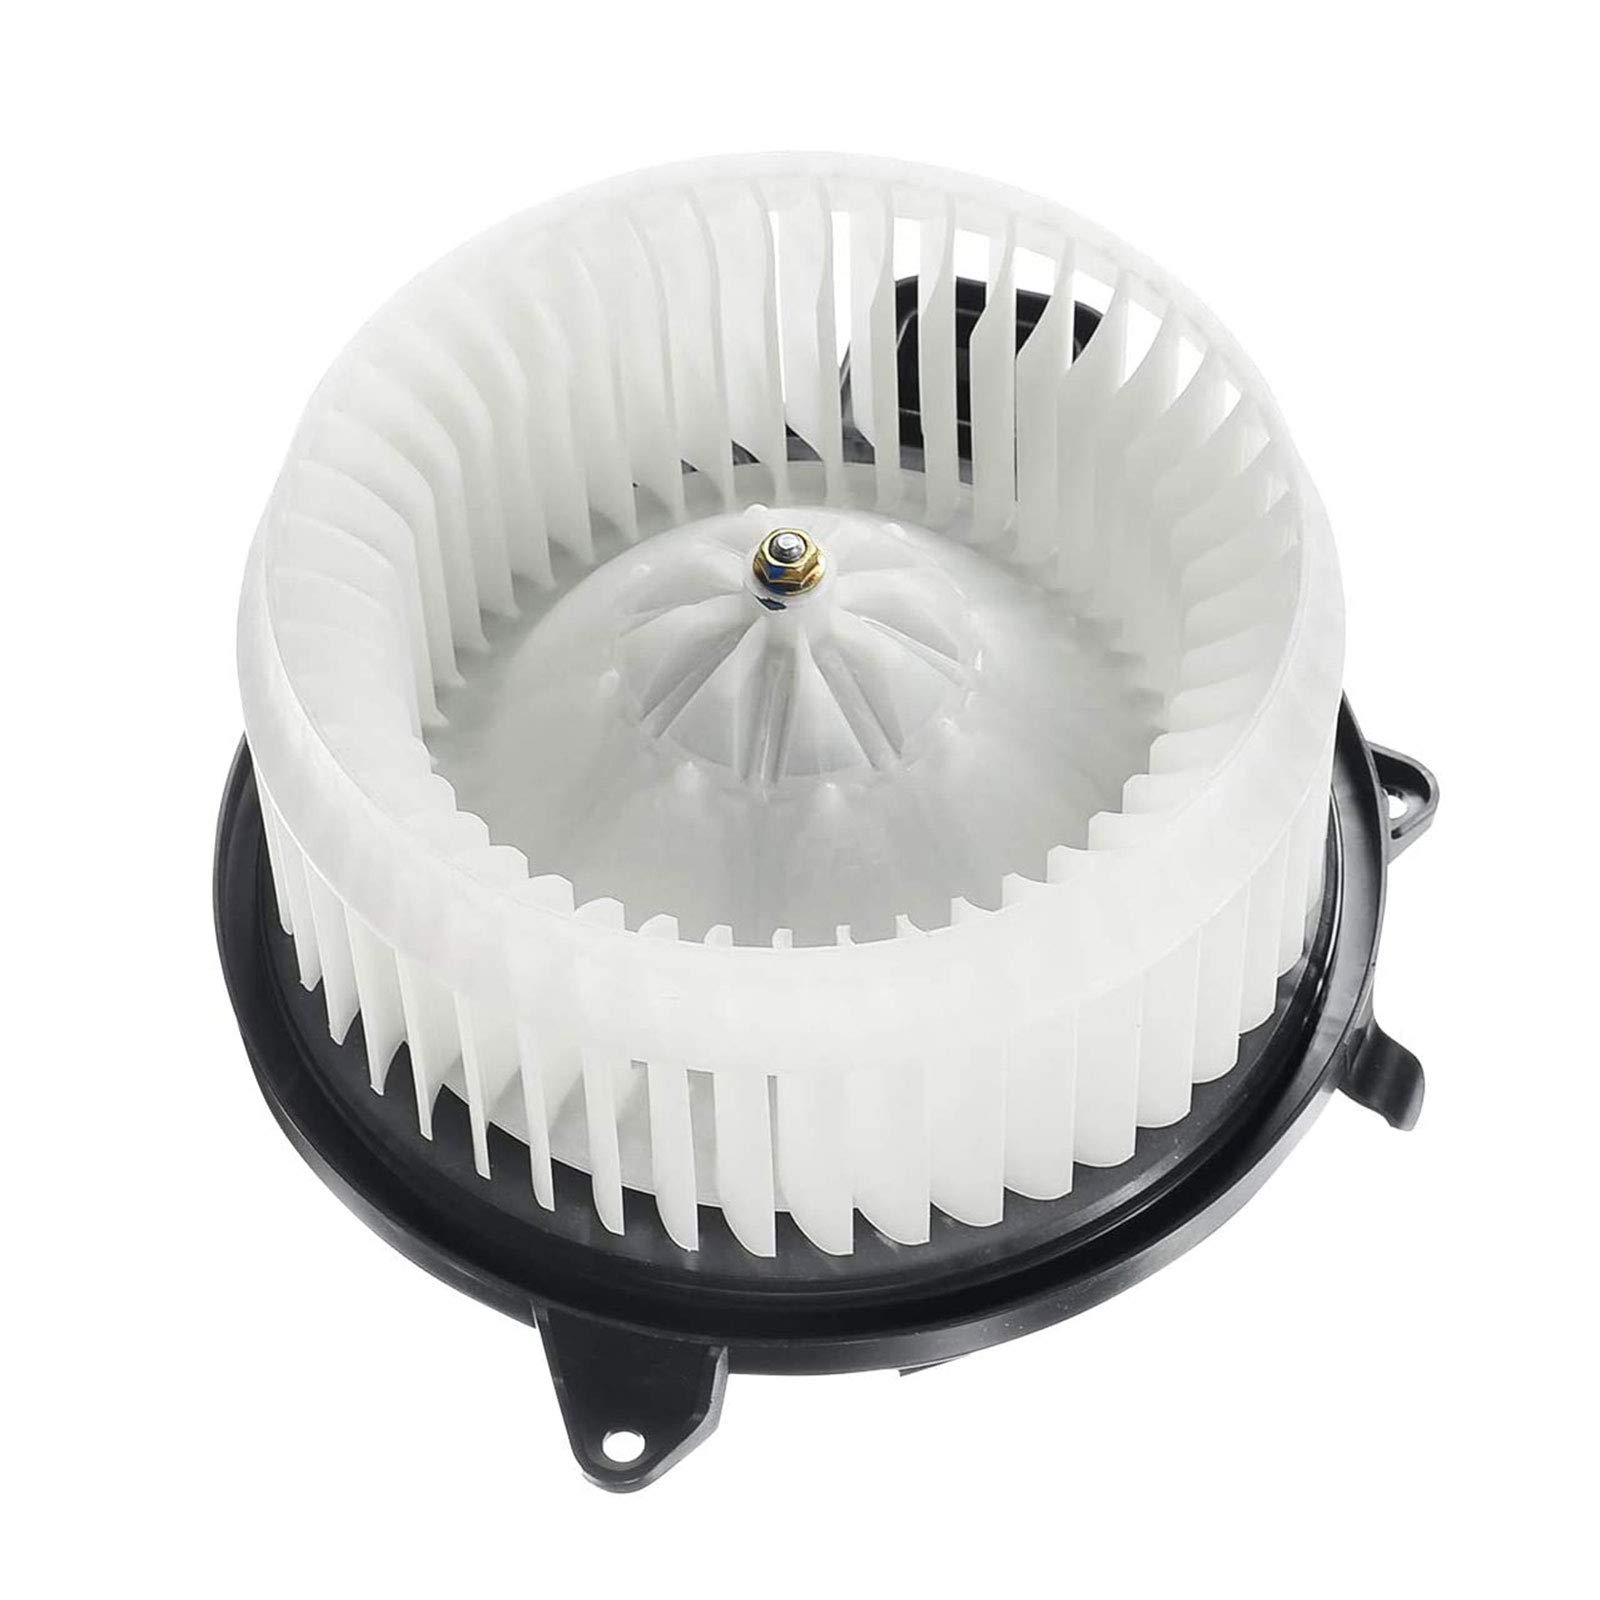 A-Premium Heater Blower Motor with Fan Cage Replacement for Ford Fusion Lincoln MKZ 2010-2012 Mercury Milan 2010-2011